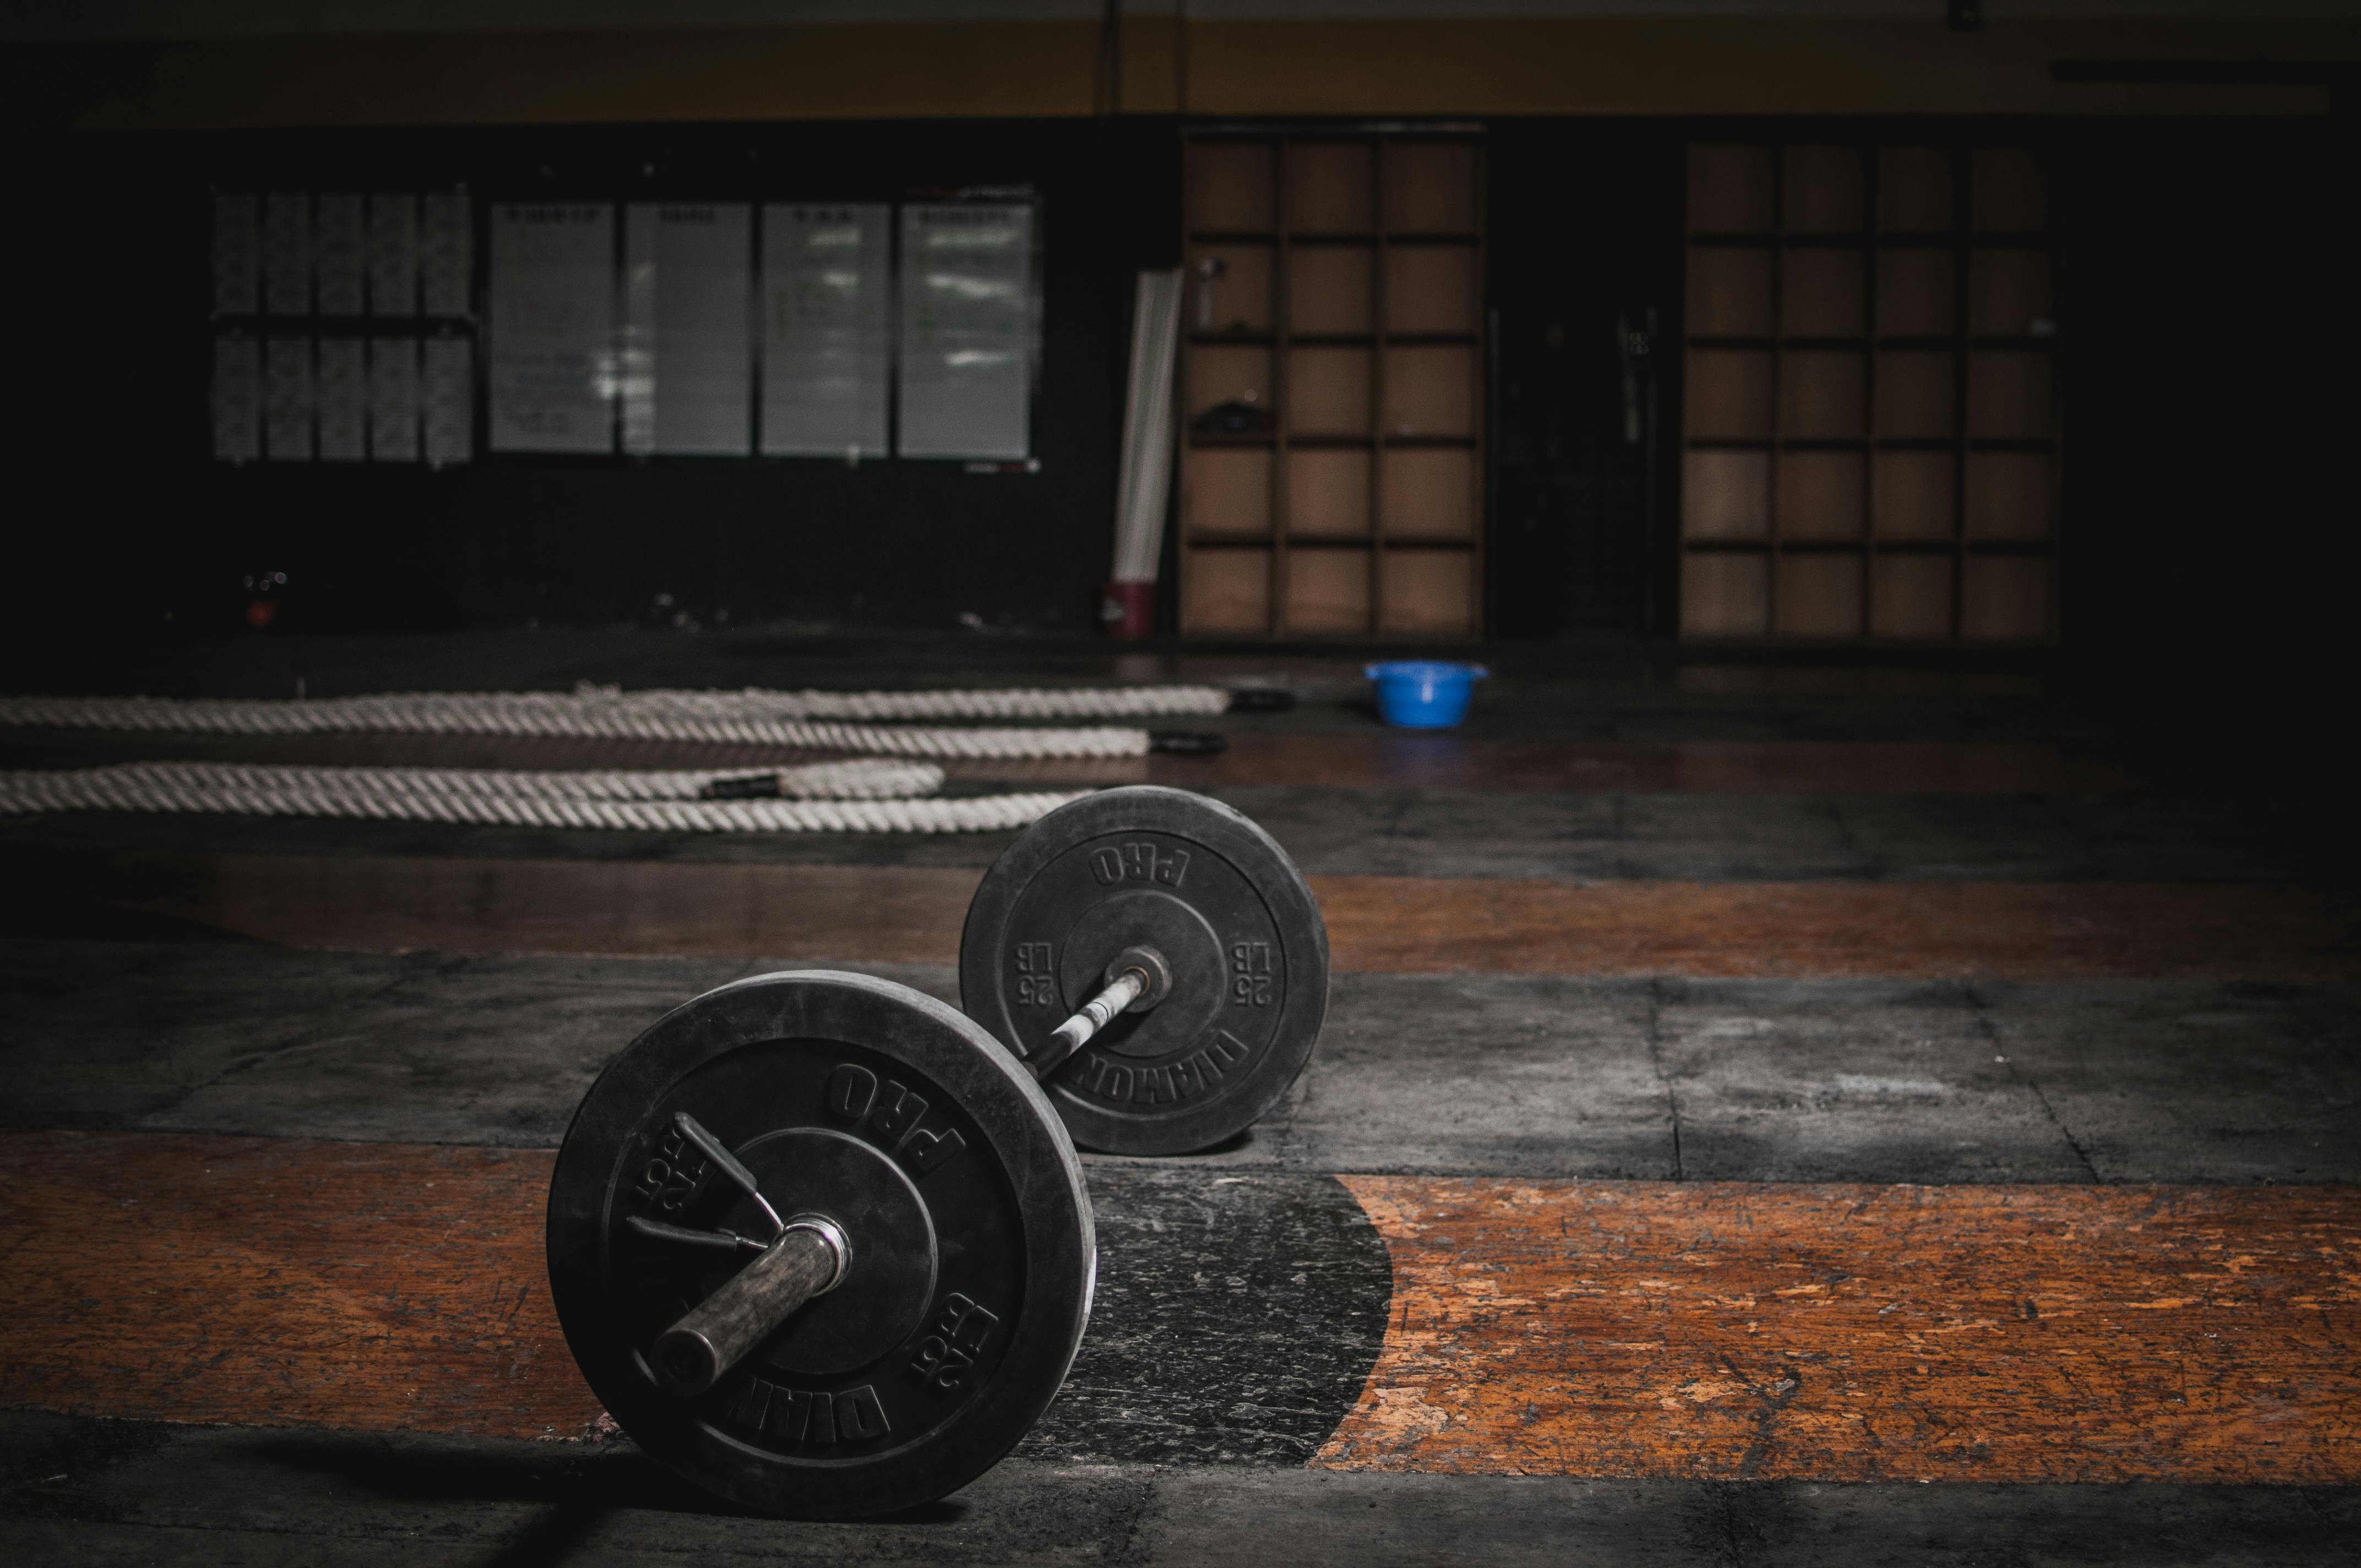 76,800+ Home Gym Stock Photos, Pictures & Royalty-Free Images